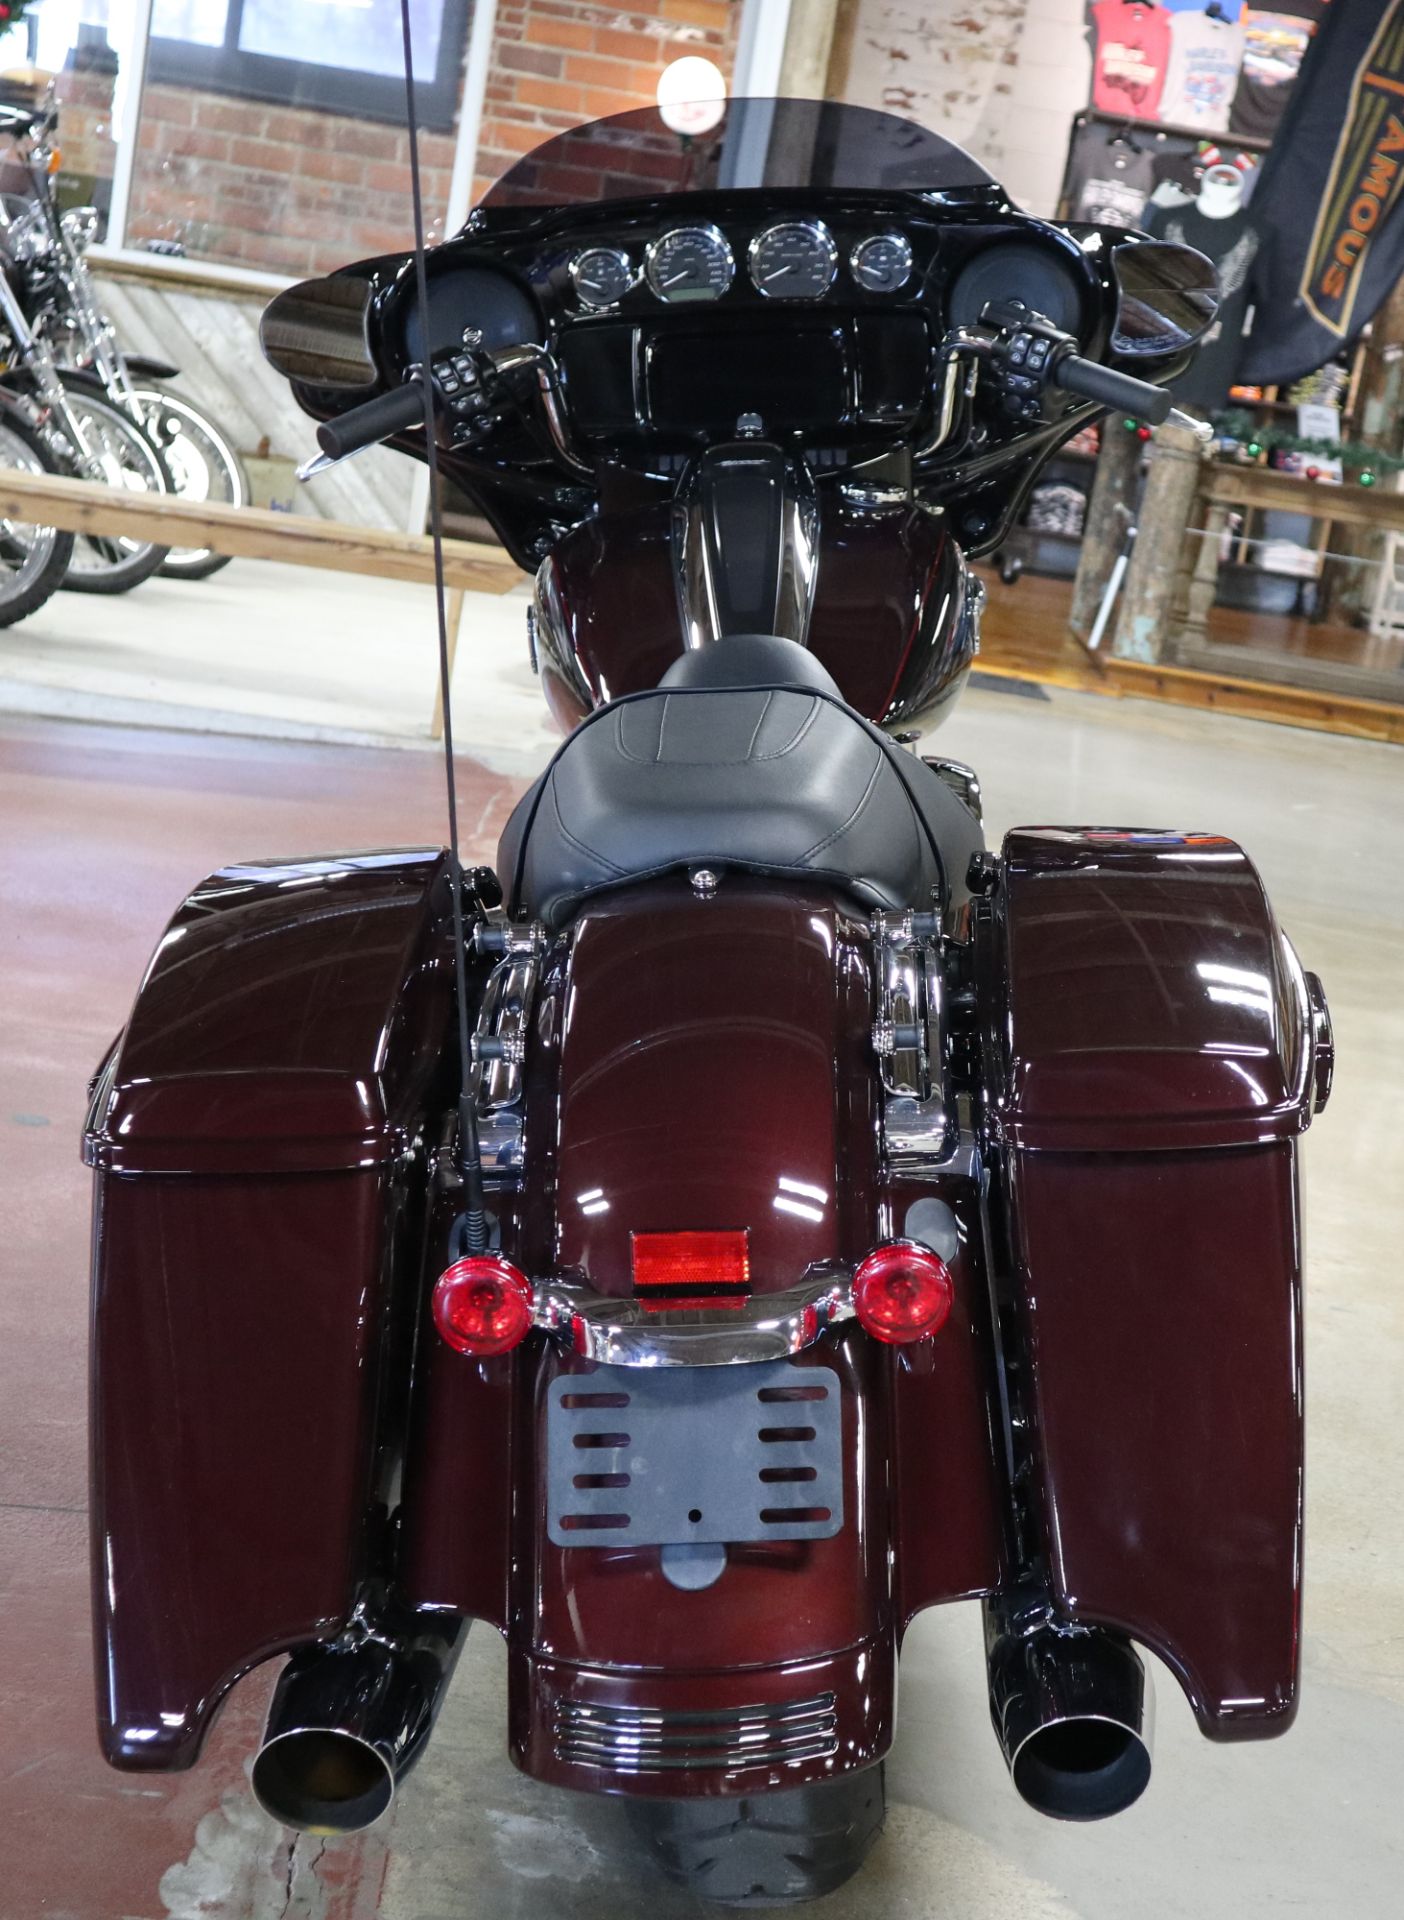 2022 Harley-Davidson Street Glide® Special in New London, Connecticut - Photo 7